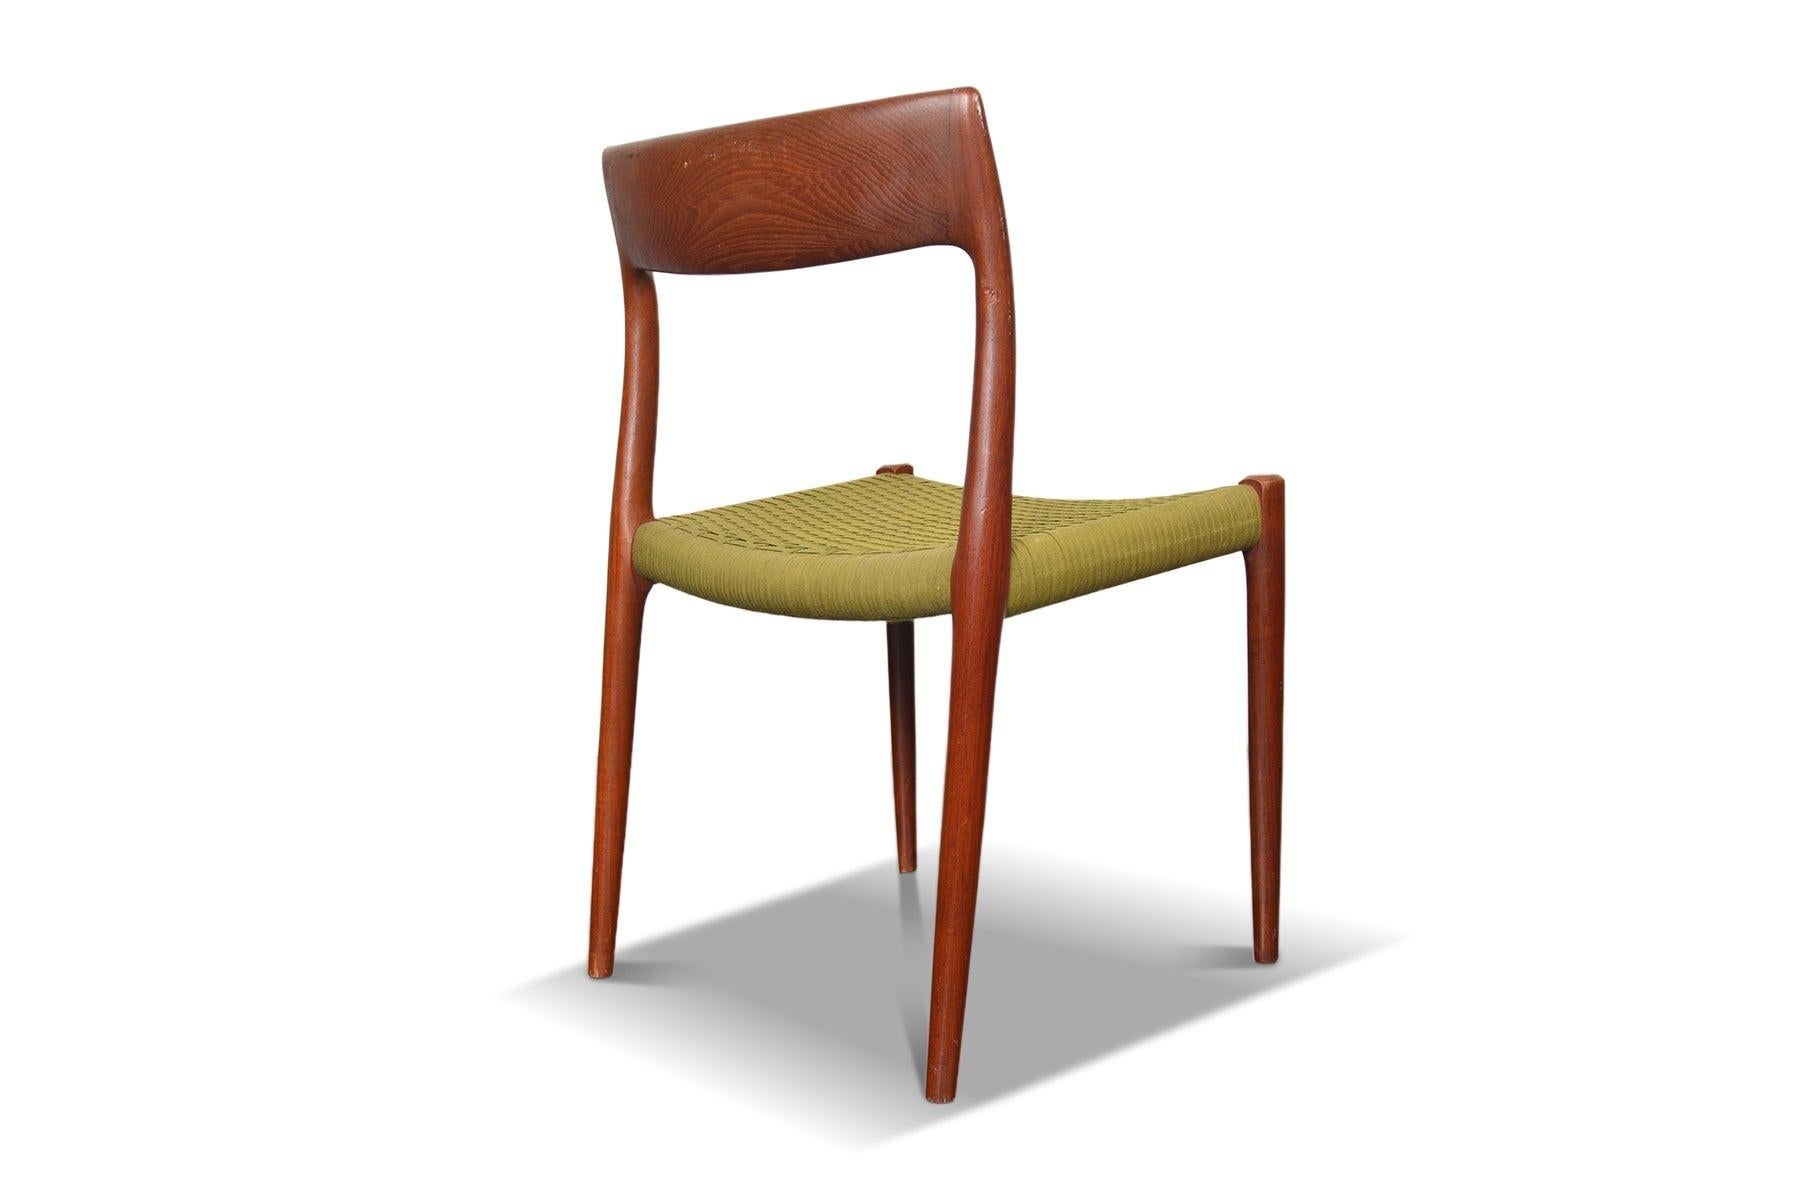 20th Century Møller Model 77 Dining Chair In Teak With Original Woven Wool Seat For Sale